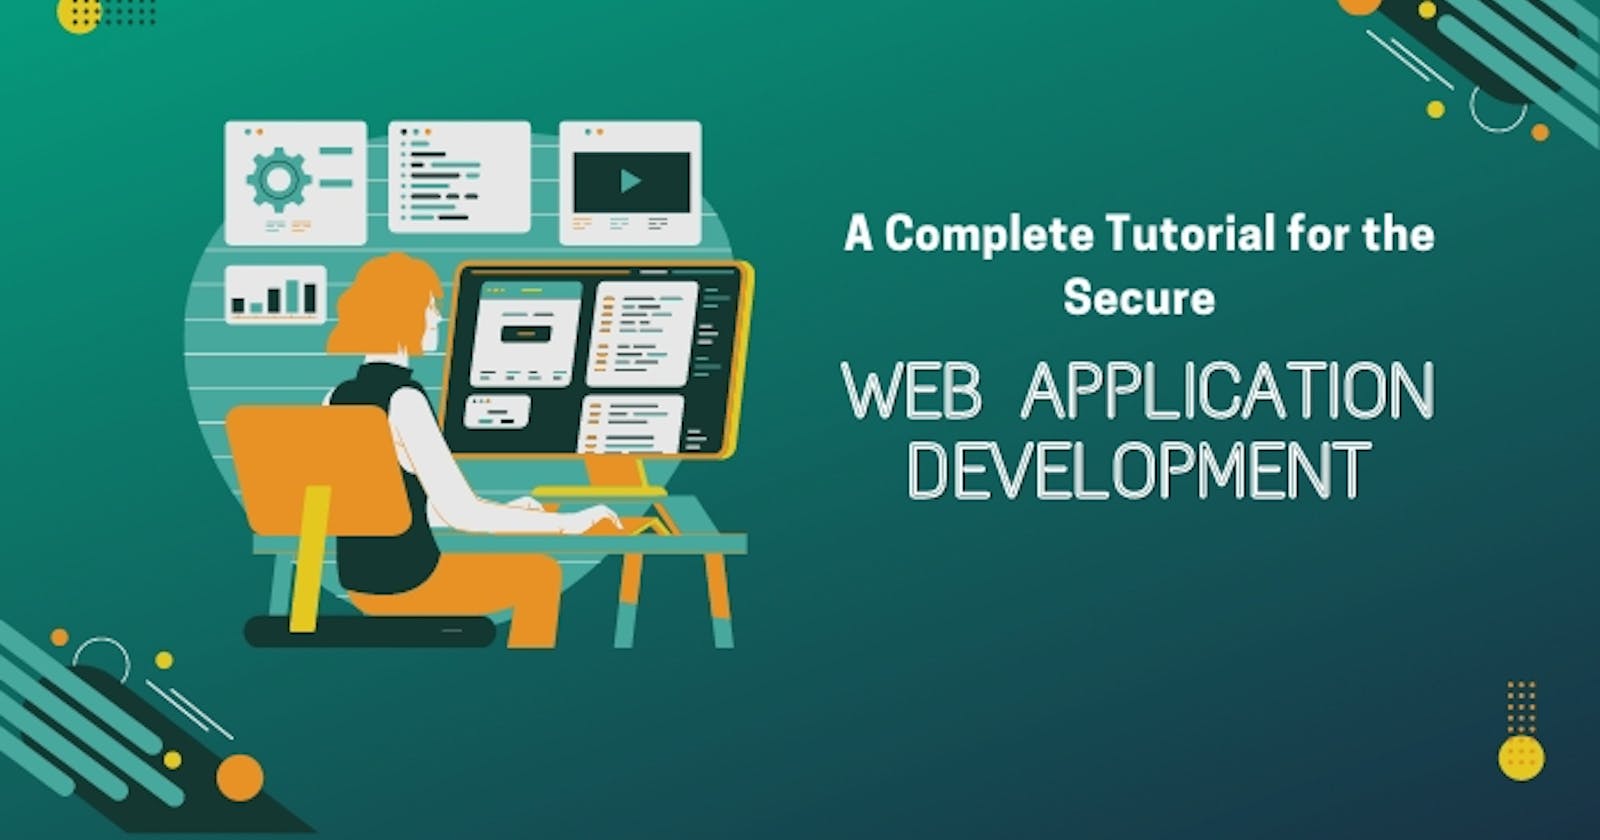 A Complete Tutorial for the Secure Web Application Development